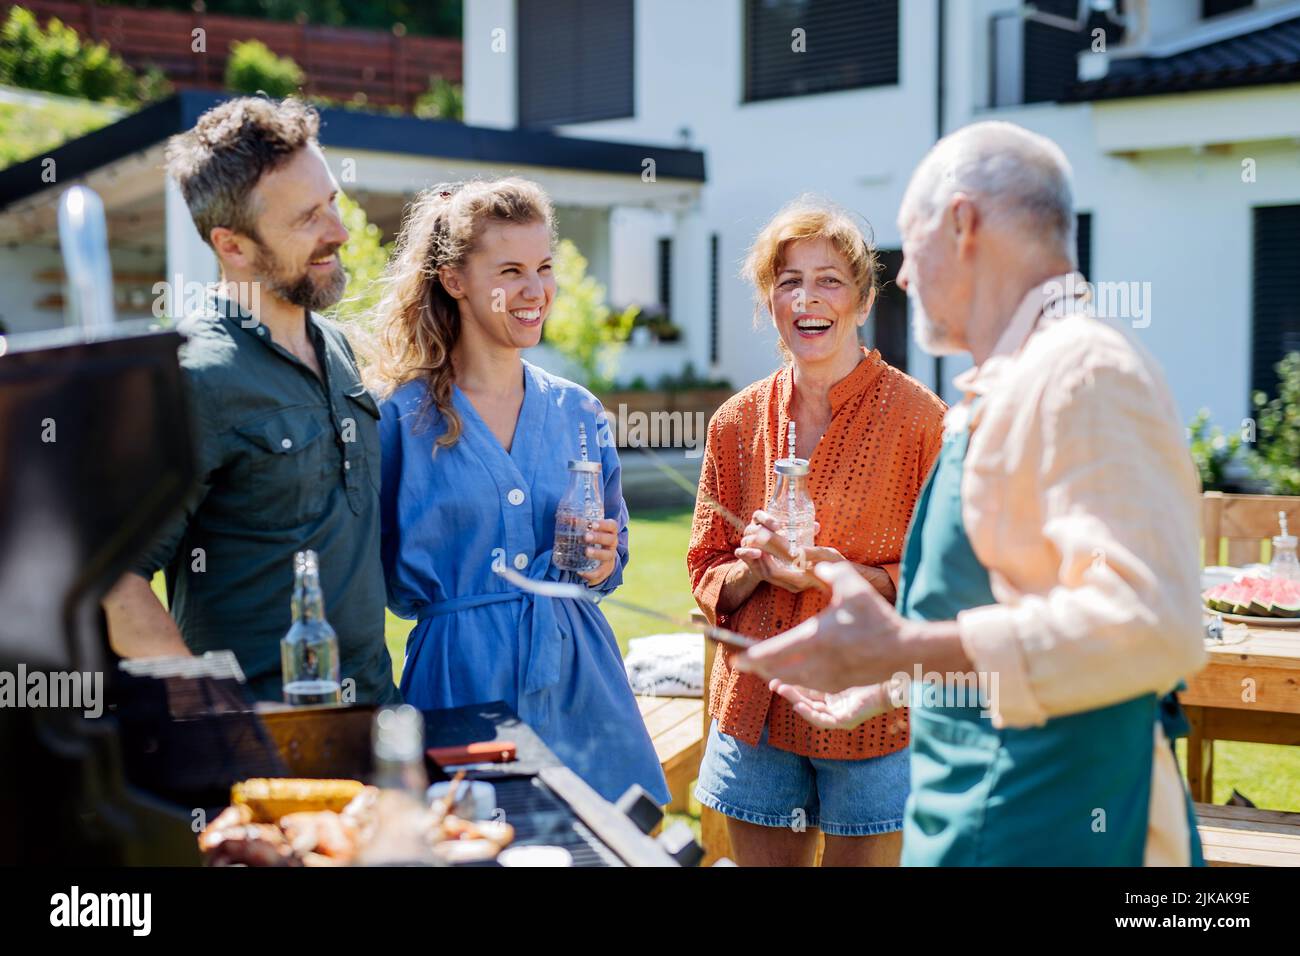 Multi generation family grilling outside on backyard in summer during garden party Stock Photo